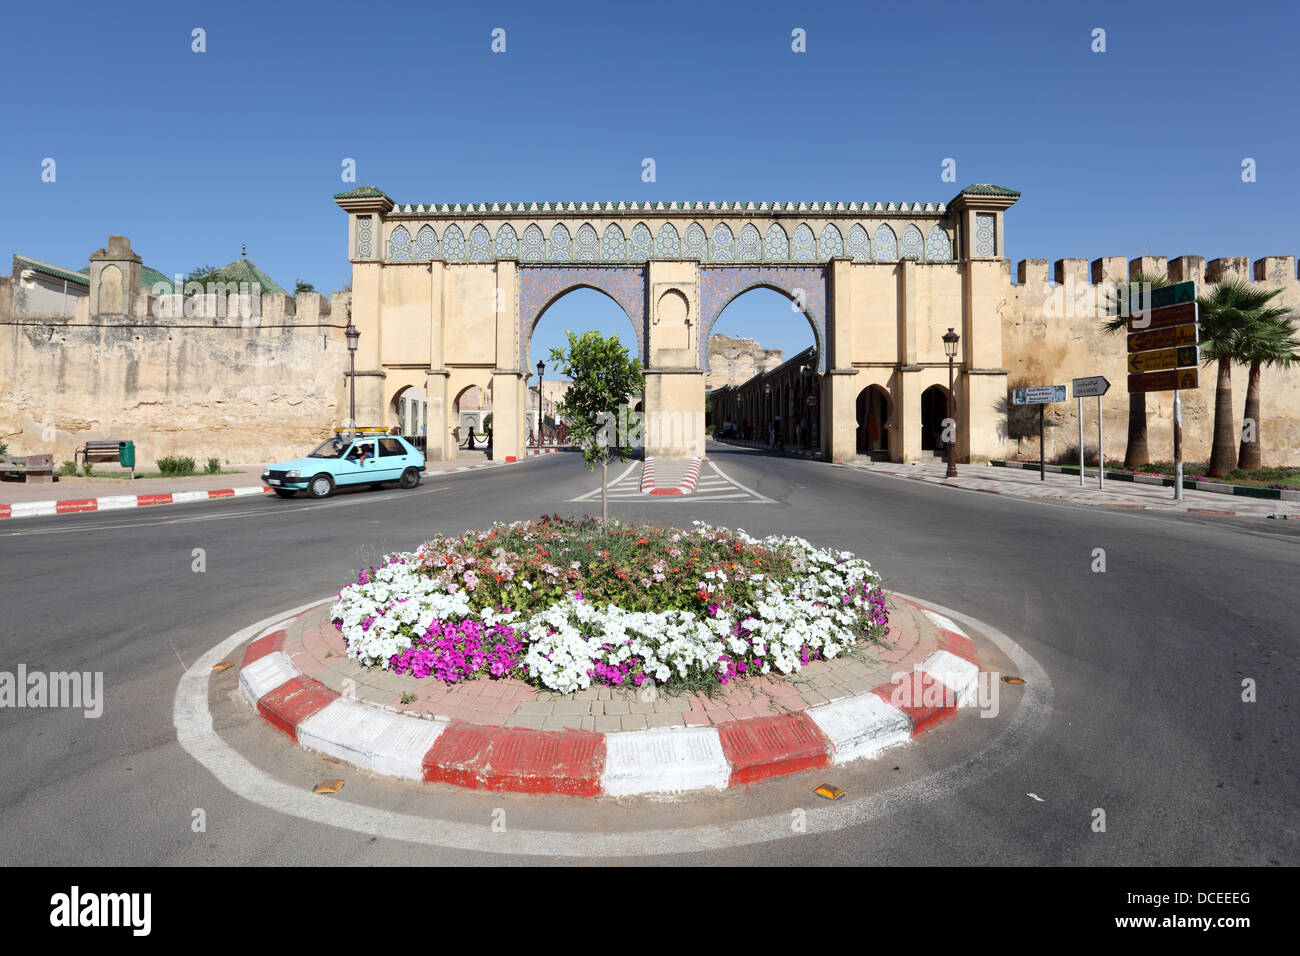 Traffic circle with flowers in Meknes, Morocco Stock Photo